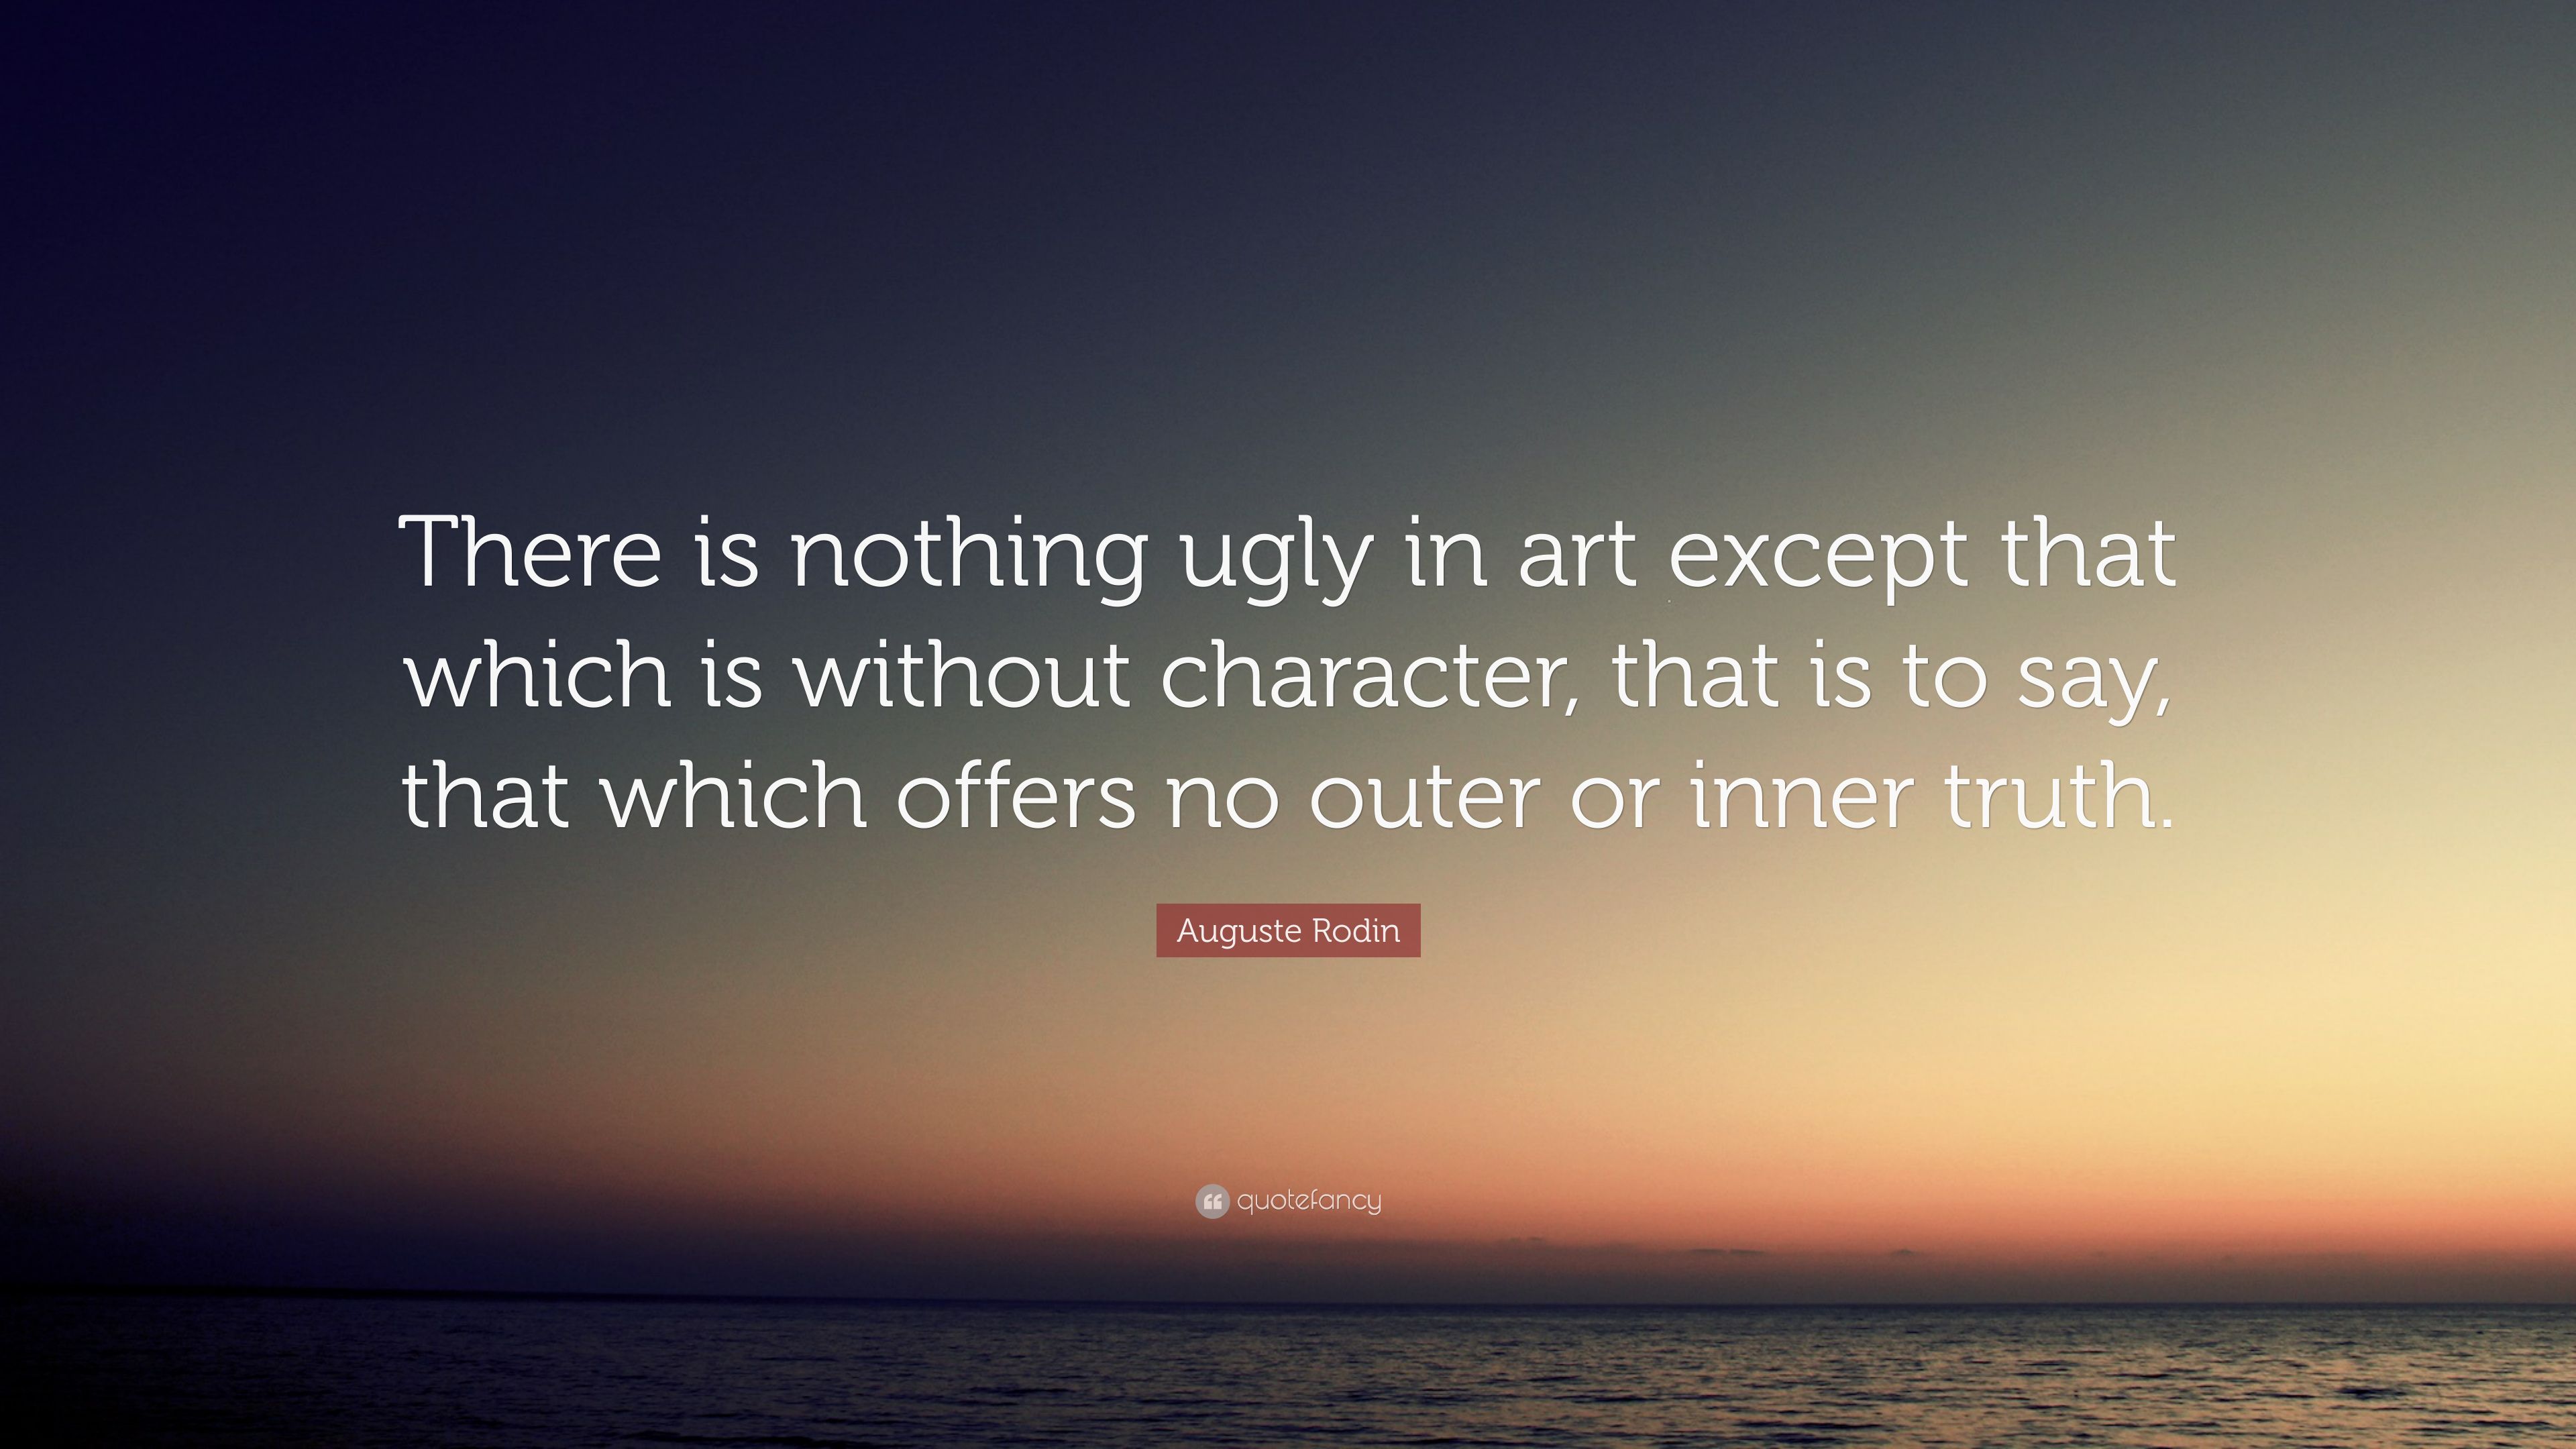 Auguste Rodin Quote: “There is nothing ugly in art except that which is without character, that is to say, that which offers no outer or inner.” (7 wallpaper)